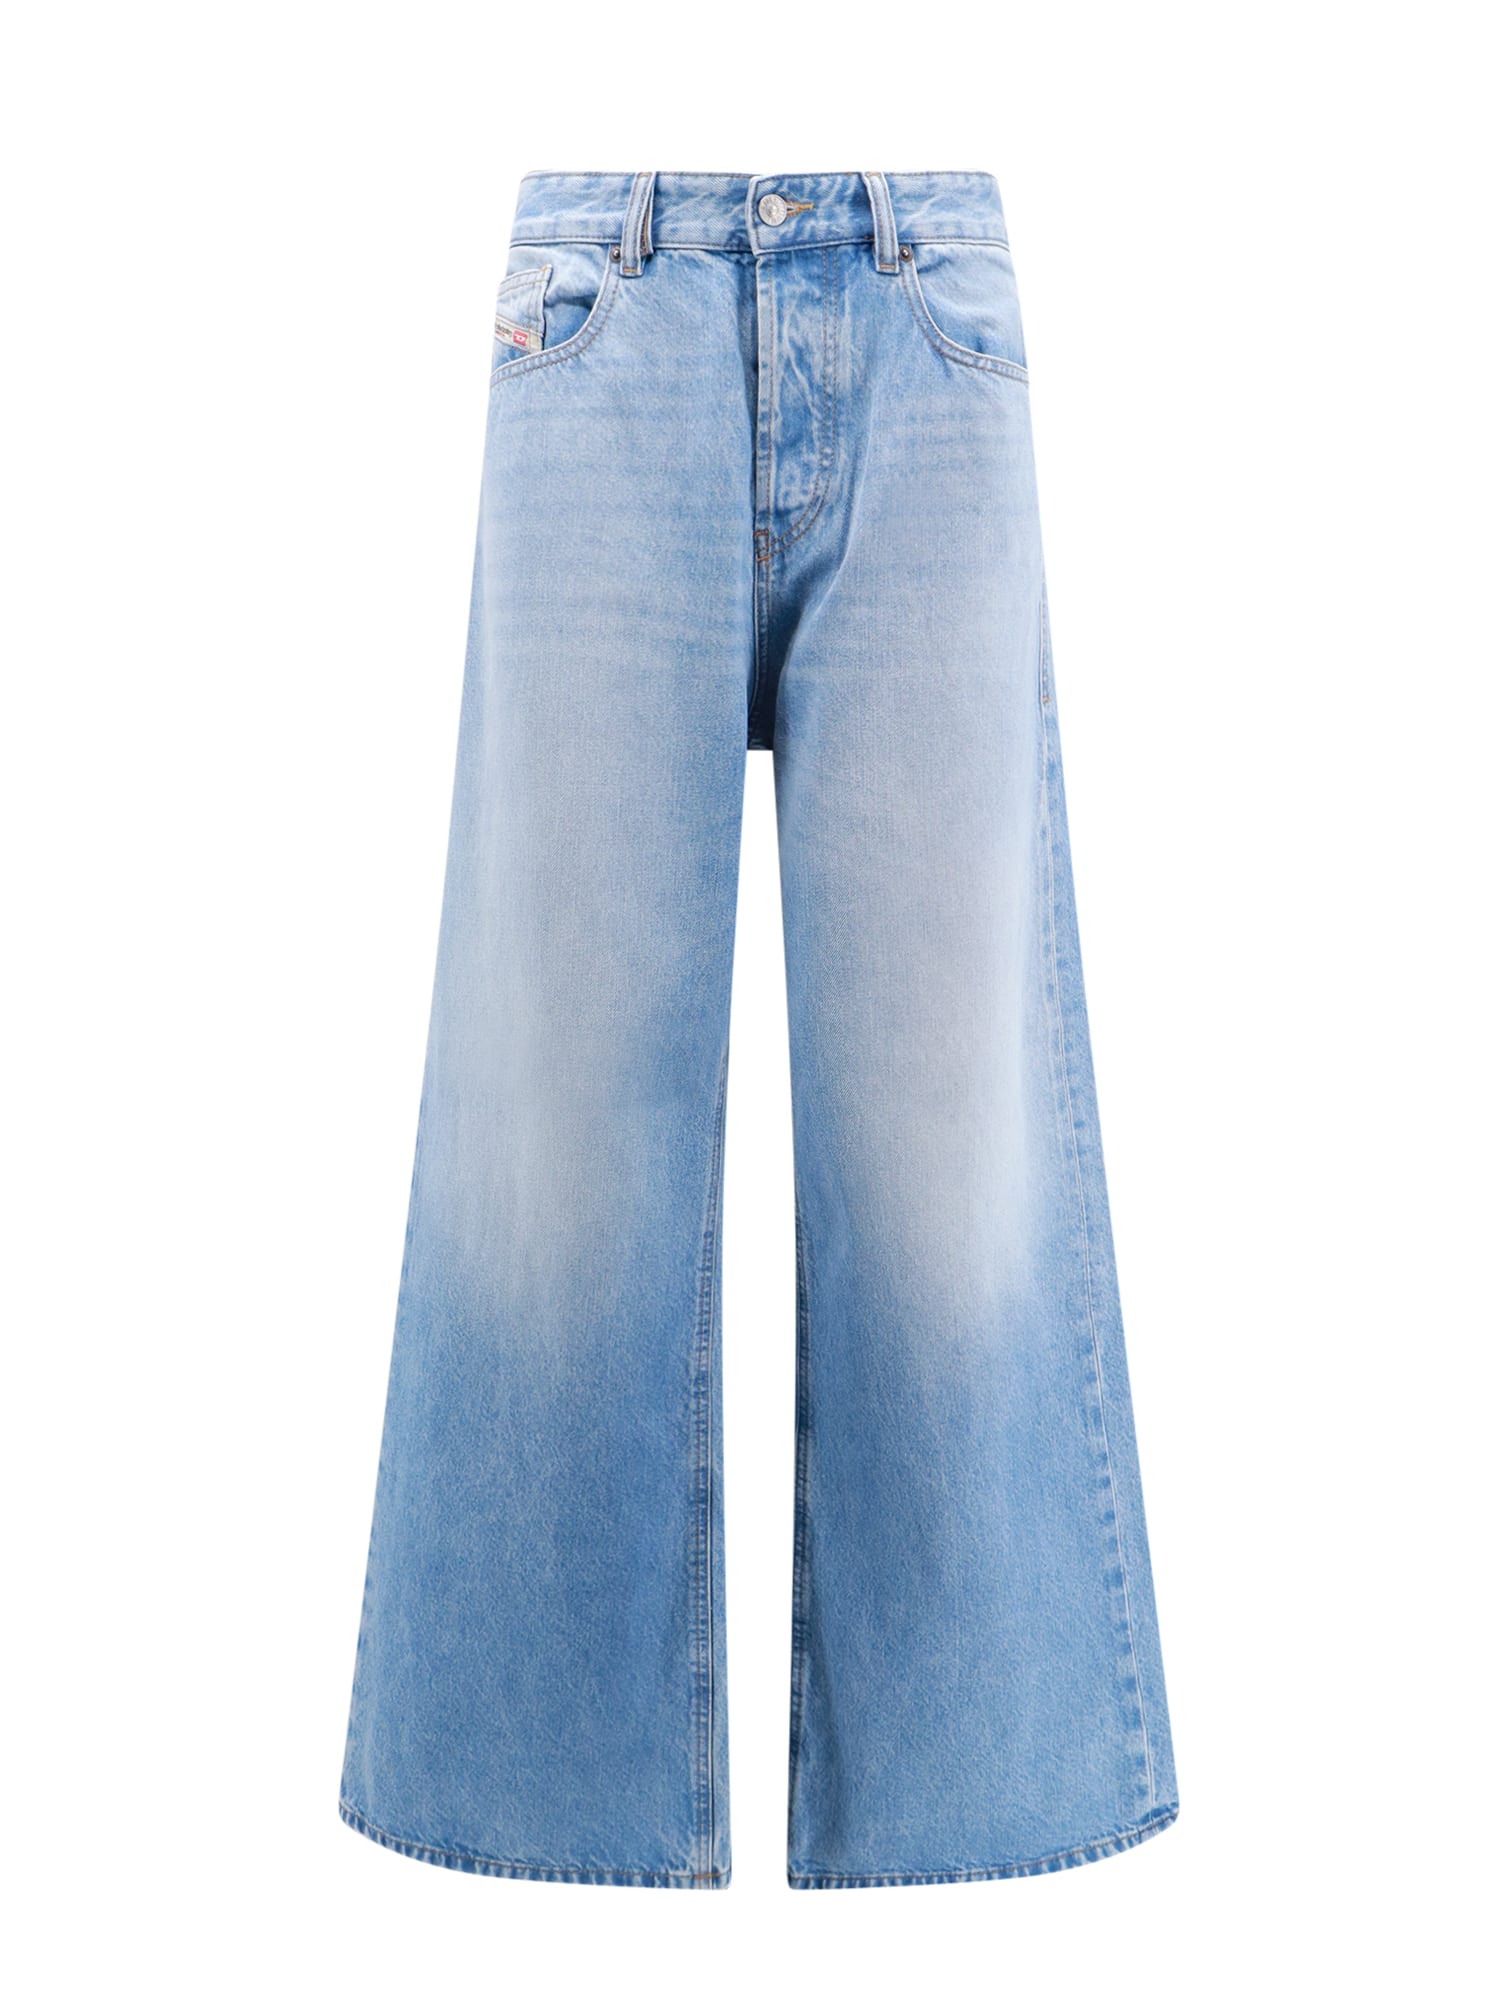 DIESEL 1996 D-SIRE 09I29 JEANS